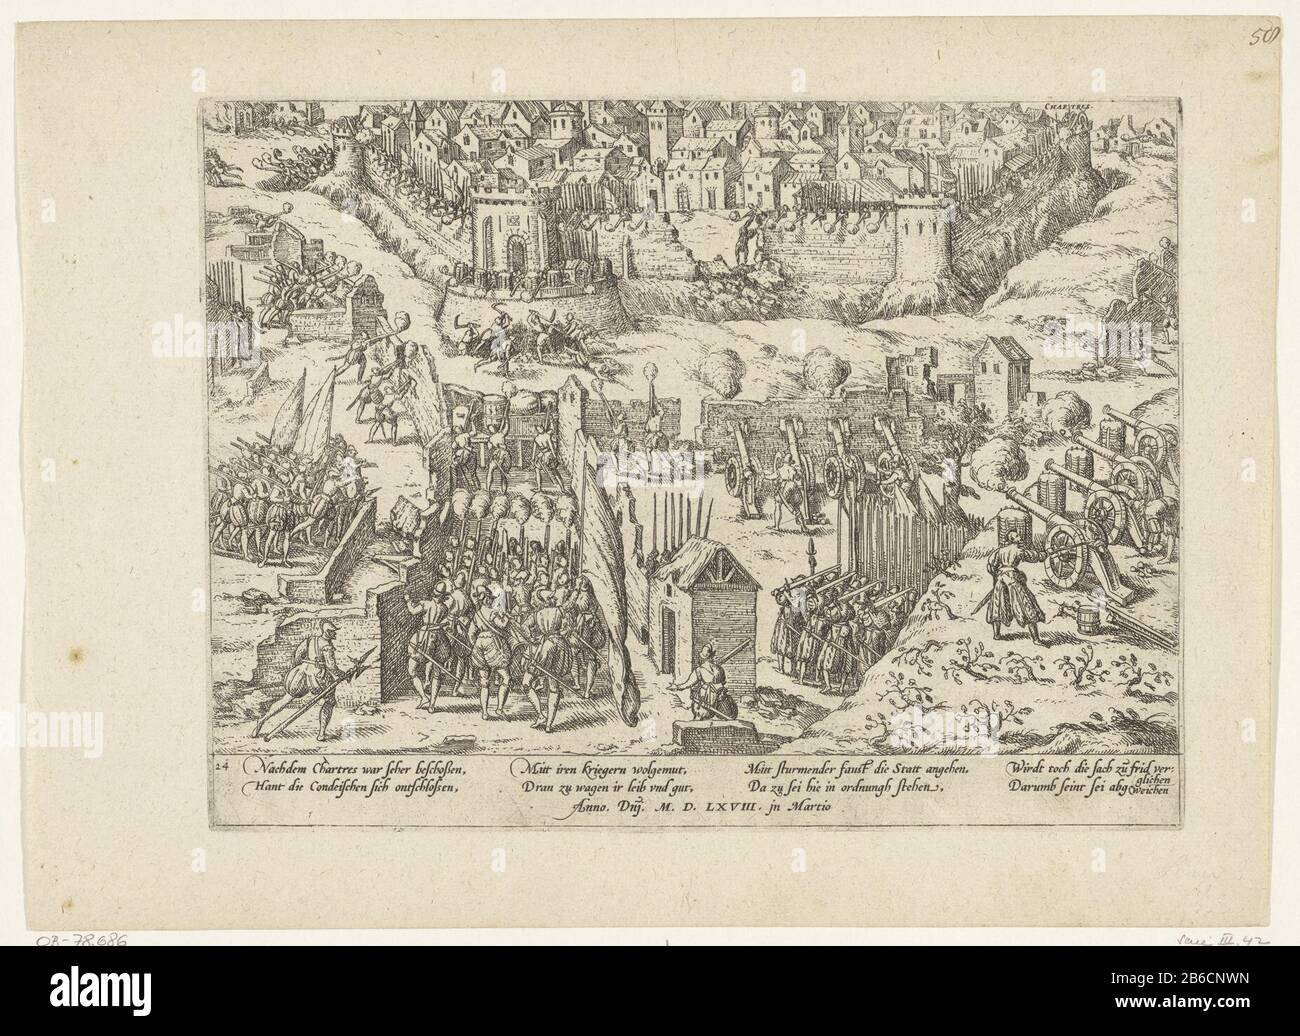 Siege and compare Chartres, 1568 Series 3 French Wars of Religion, 1559-1573 (series title) Siege and compare Chartres 1568Serie 3: French Wars of Religion, 1559-1573 (series title) Property Type: print history print Serial Number 42 / 469Objectnummer: RP-P-OB-78.686Catalogusreferentie: FMH 413-42Hellwig 43New Hollstein Dutch B40-3 (4) Description: Siege and compare Chartres March 1568. shelling of the walled city. With signature of 8 lines in German. Numbered 24. Leaf comes from an album that is disassembled. Upper right numbered (in pen) 58 Manufacturer : printmaker French High Mountain To p Stock Photo